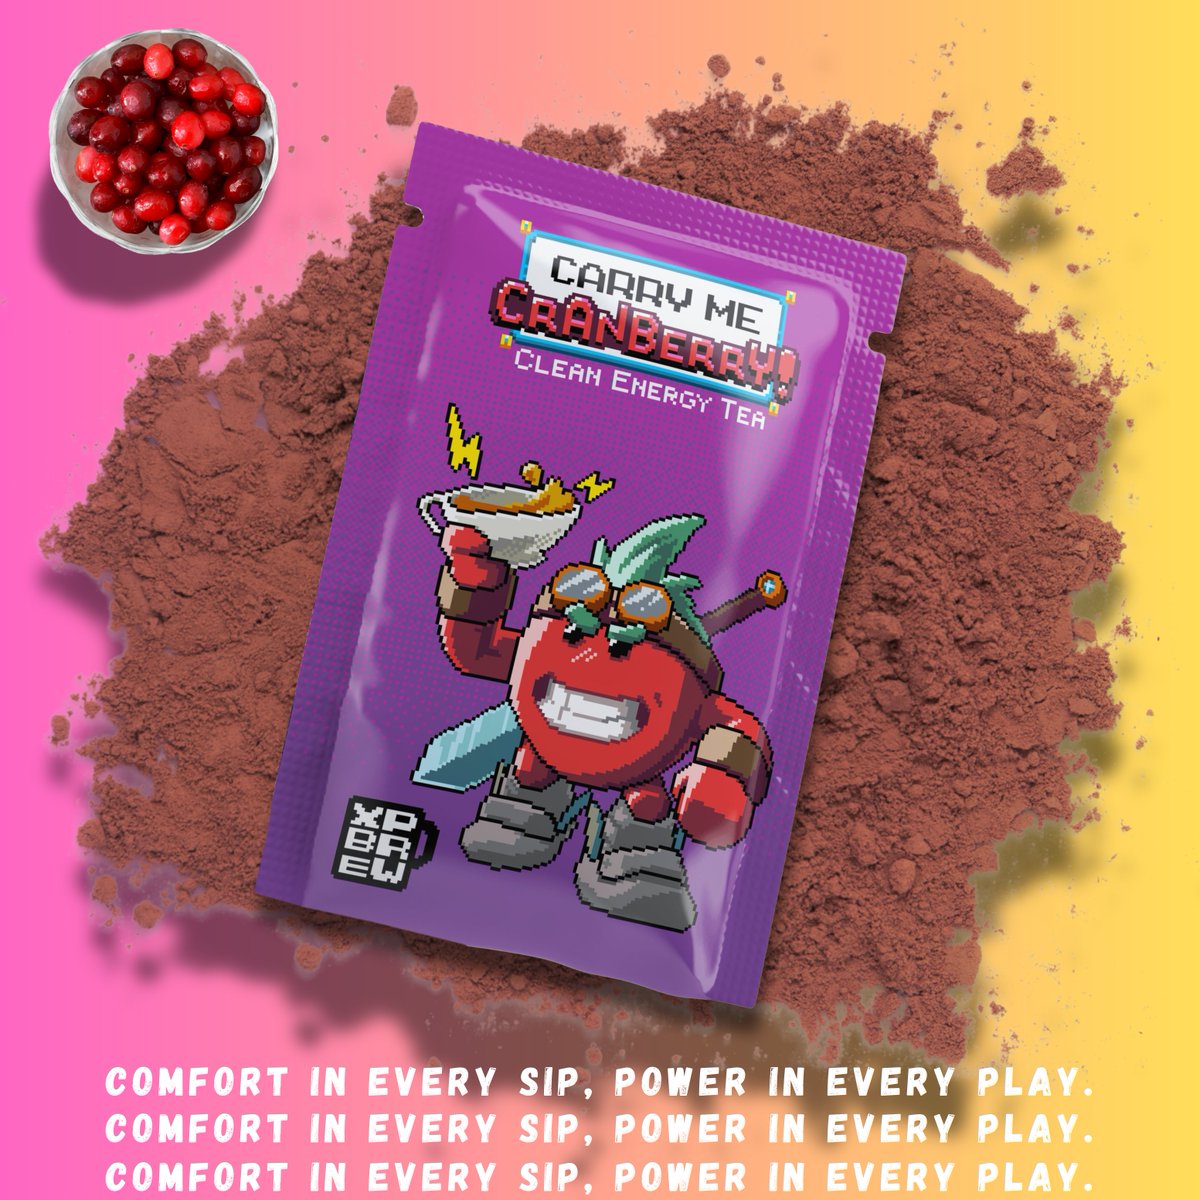 Carry Me Cranberry 🍒

Sick of carrying everyone on your back in game sessions⁉

☕This energy tea is for you. 

Re-charge your senses with XP BREW. 

 #cleanenergy  #gaming #xpbrew #gamer #energydrink